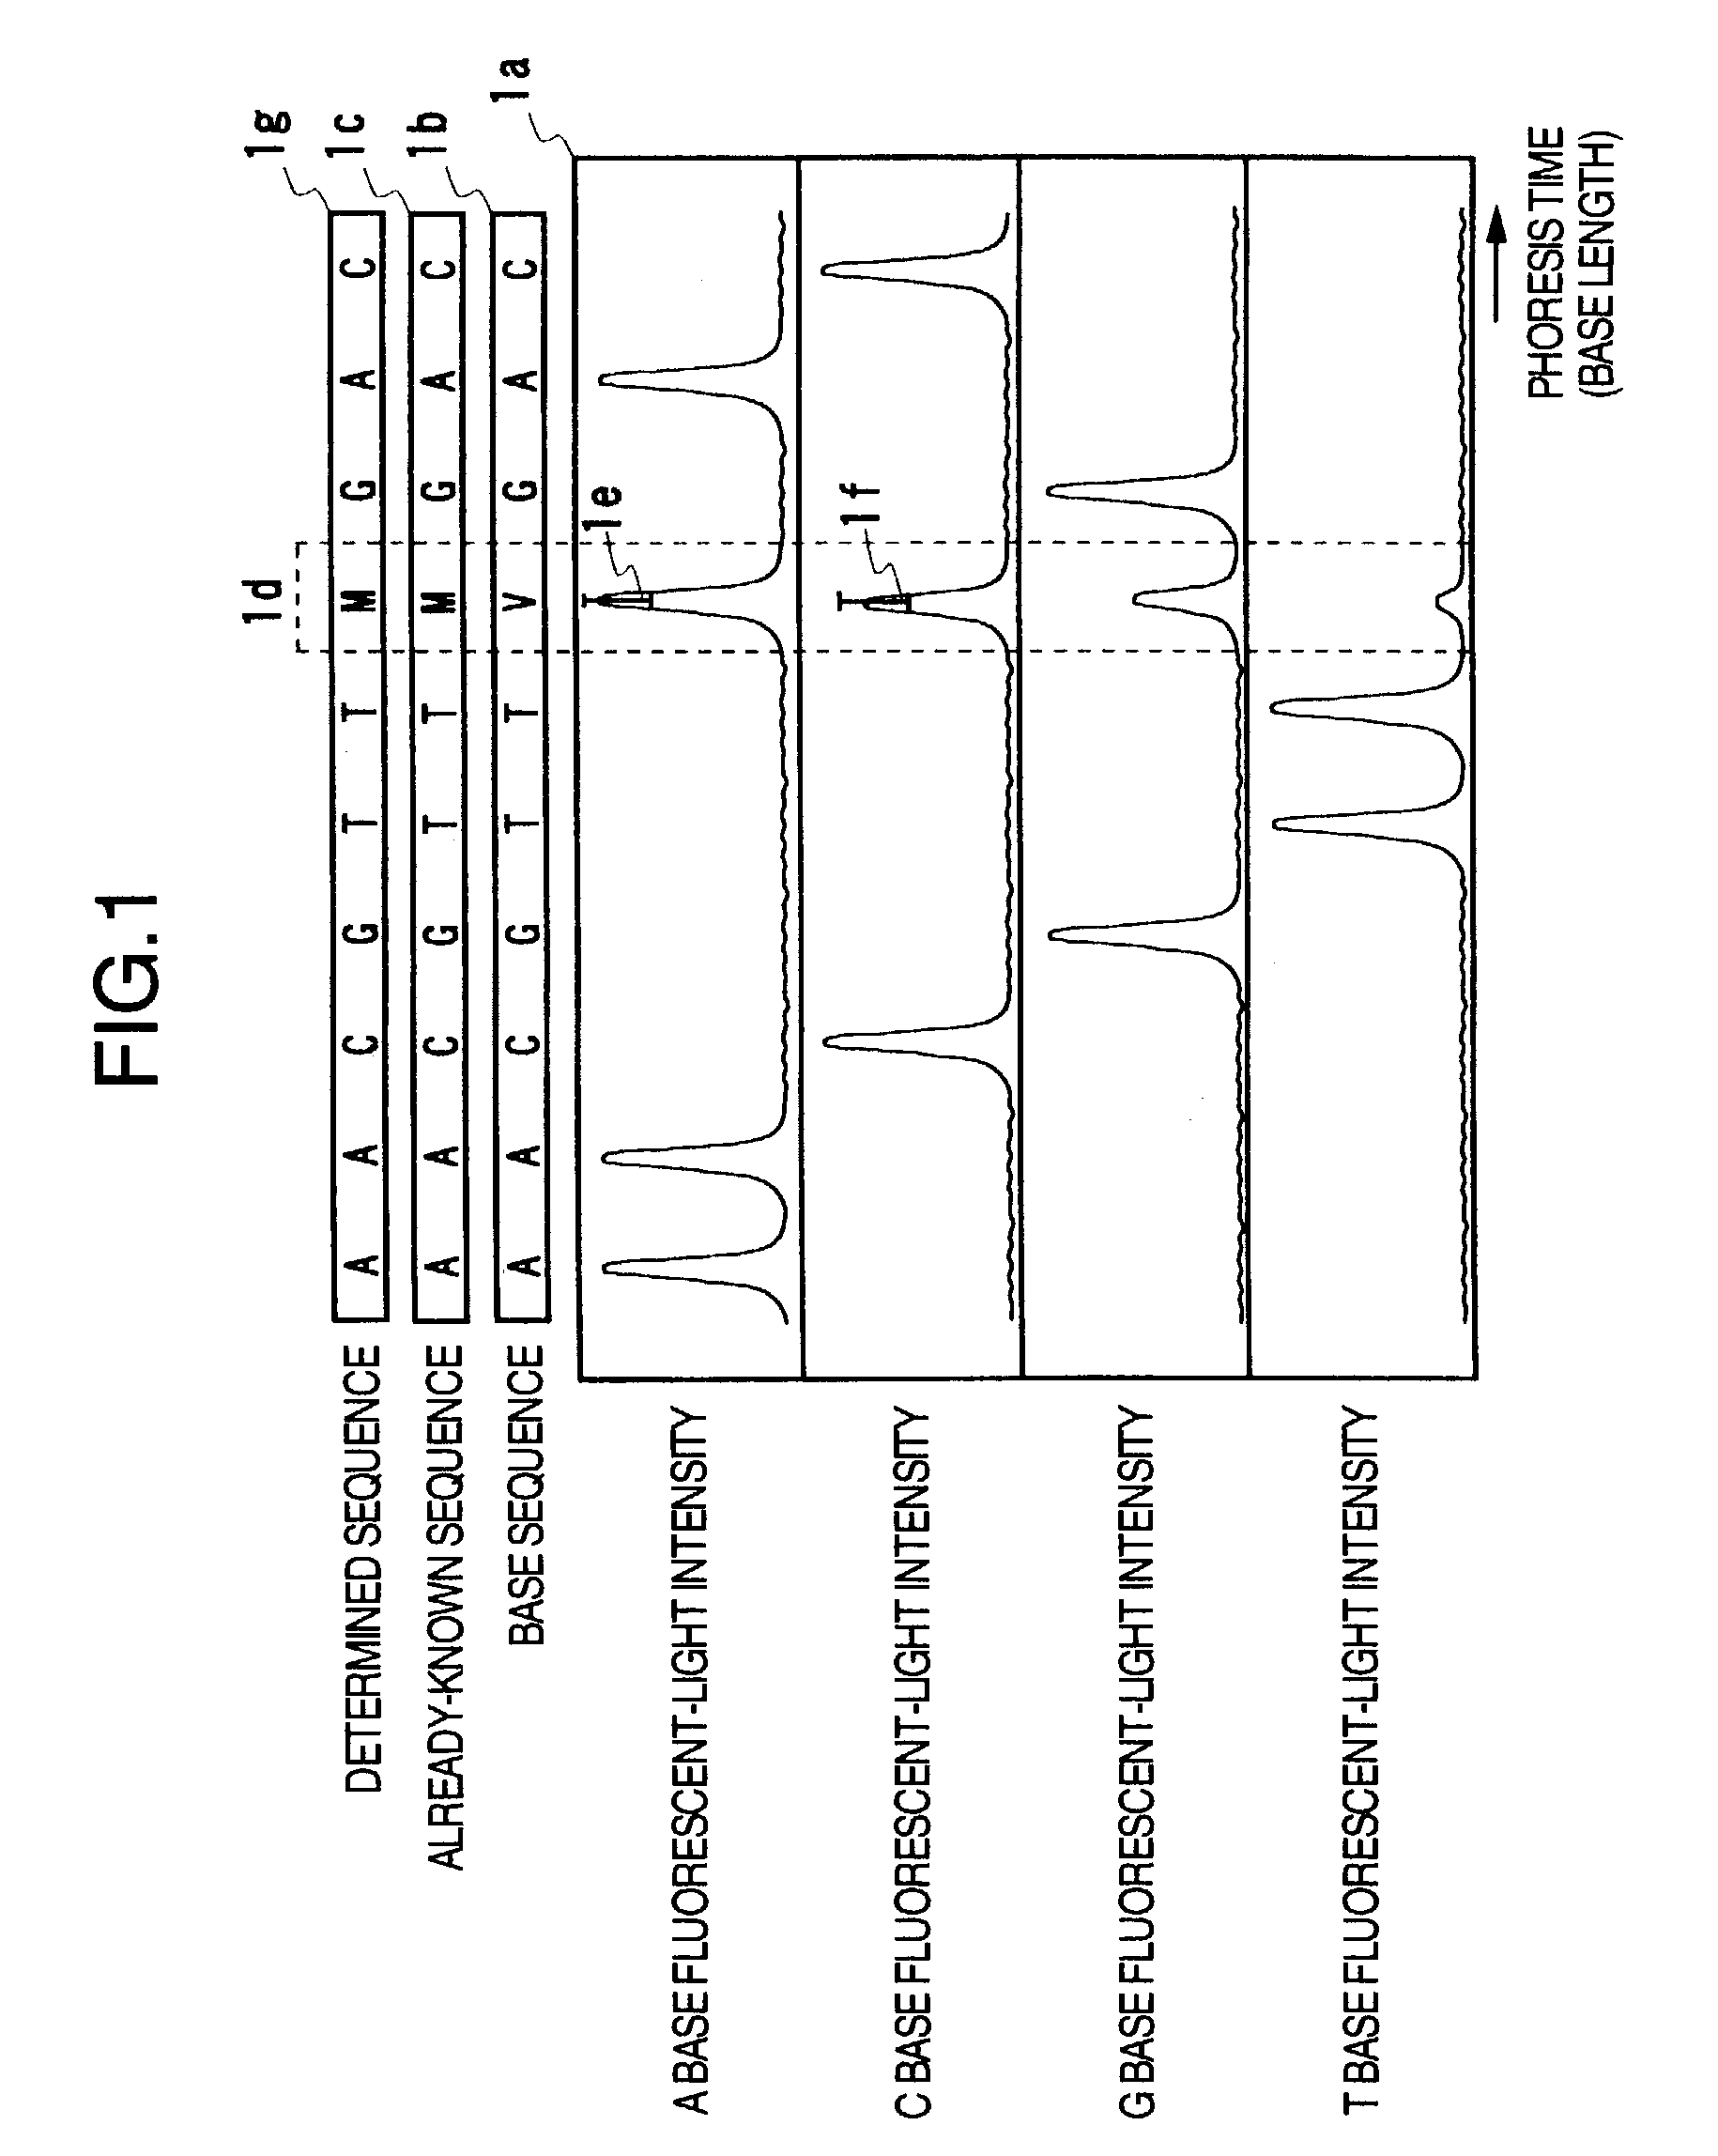 Nucleic acid base sequence determining method and inspecting system